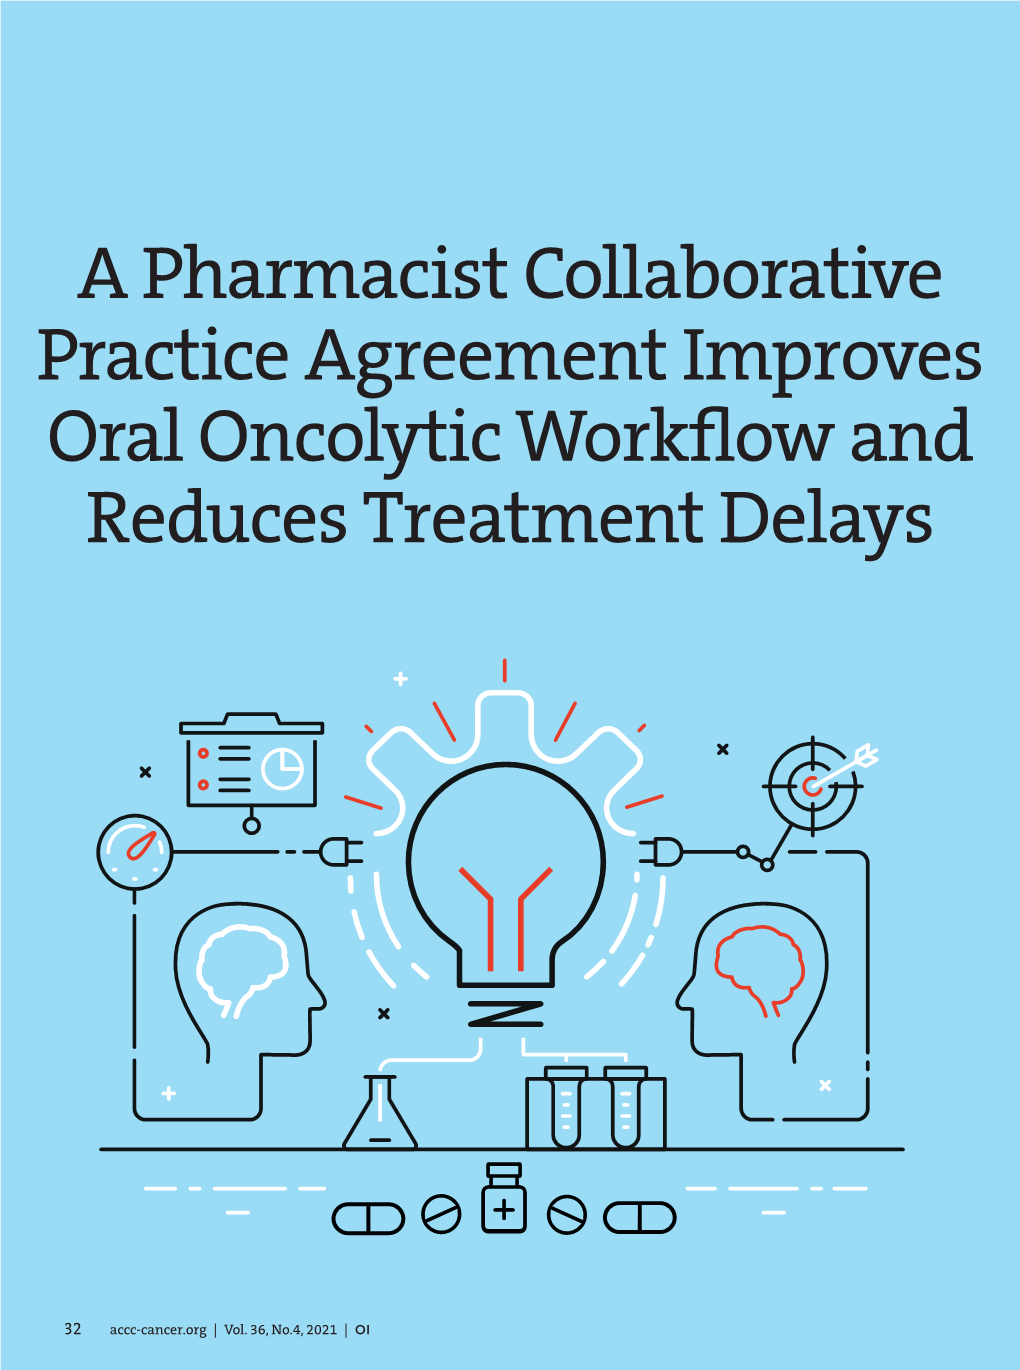 A Pharmacist Collaborative Practice Agreement Improves Oral Oncolytic Workflow and Reduces Treatment Delays